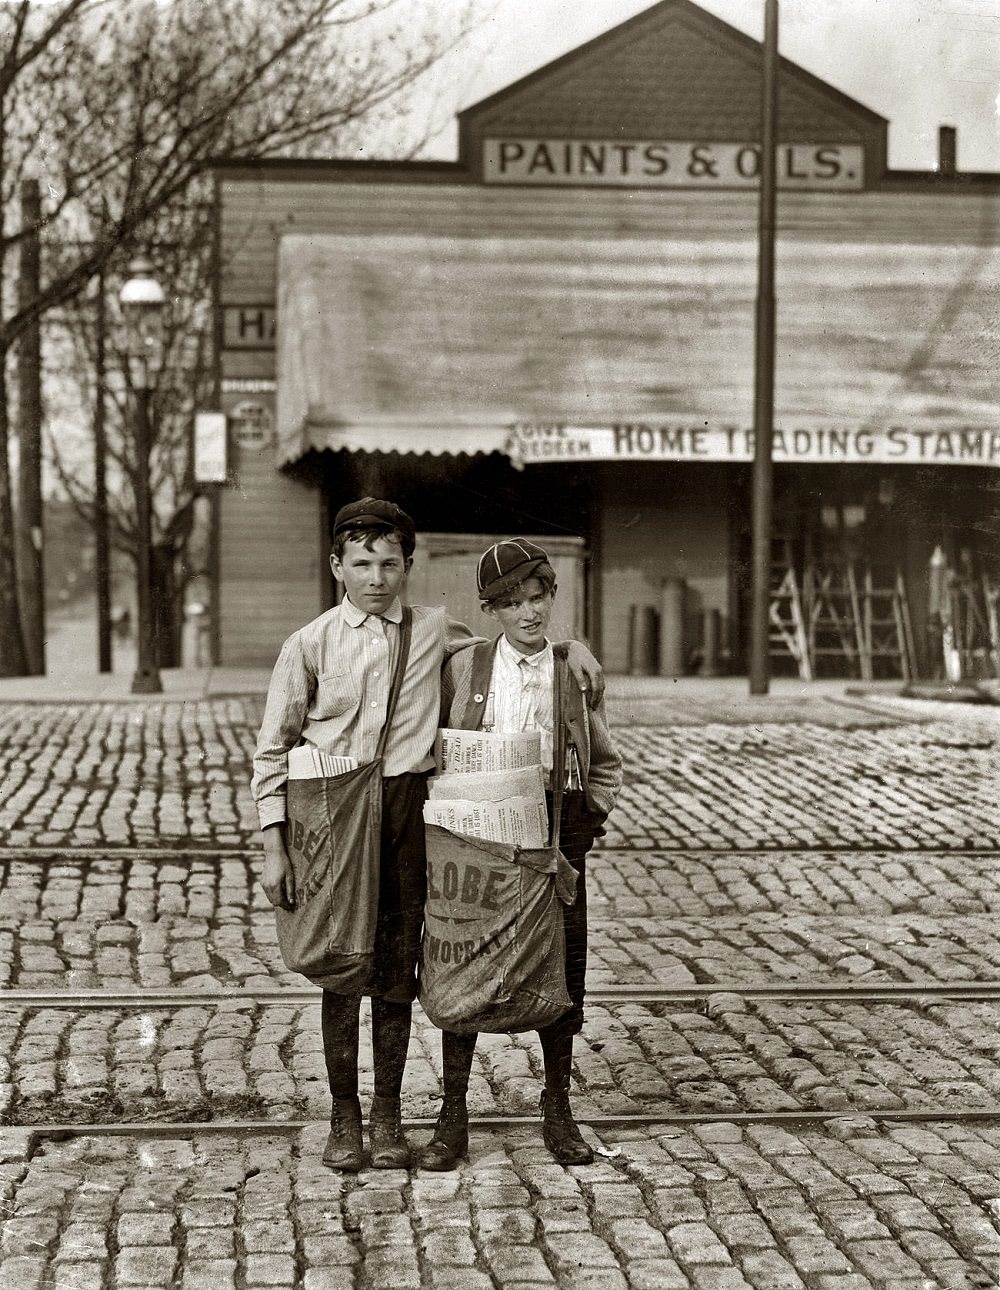 The boy on the right, nicknamed Turk, St. Louis, May 1910